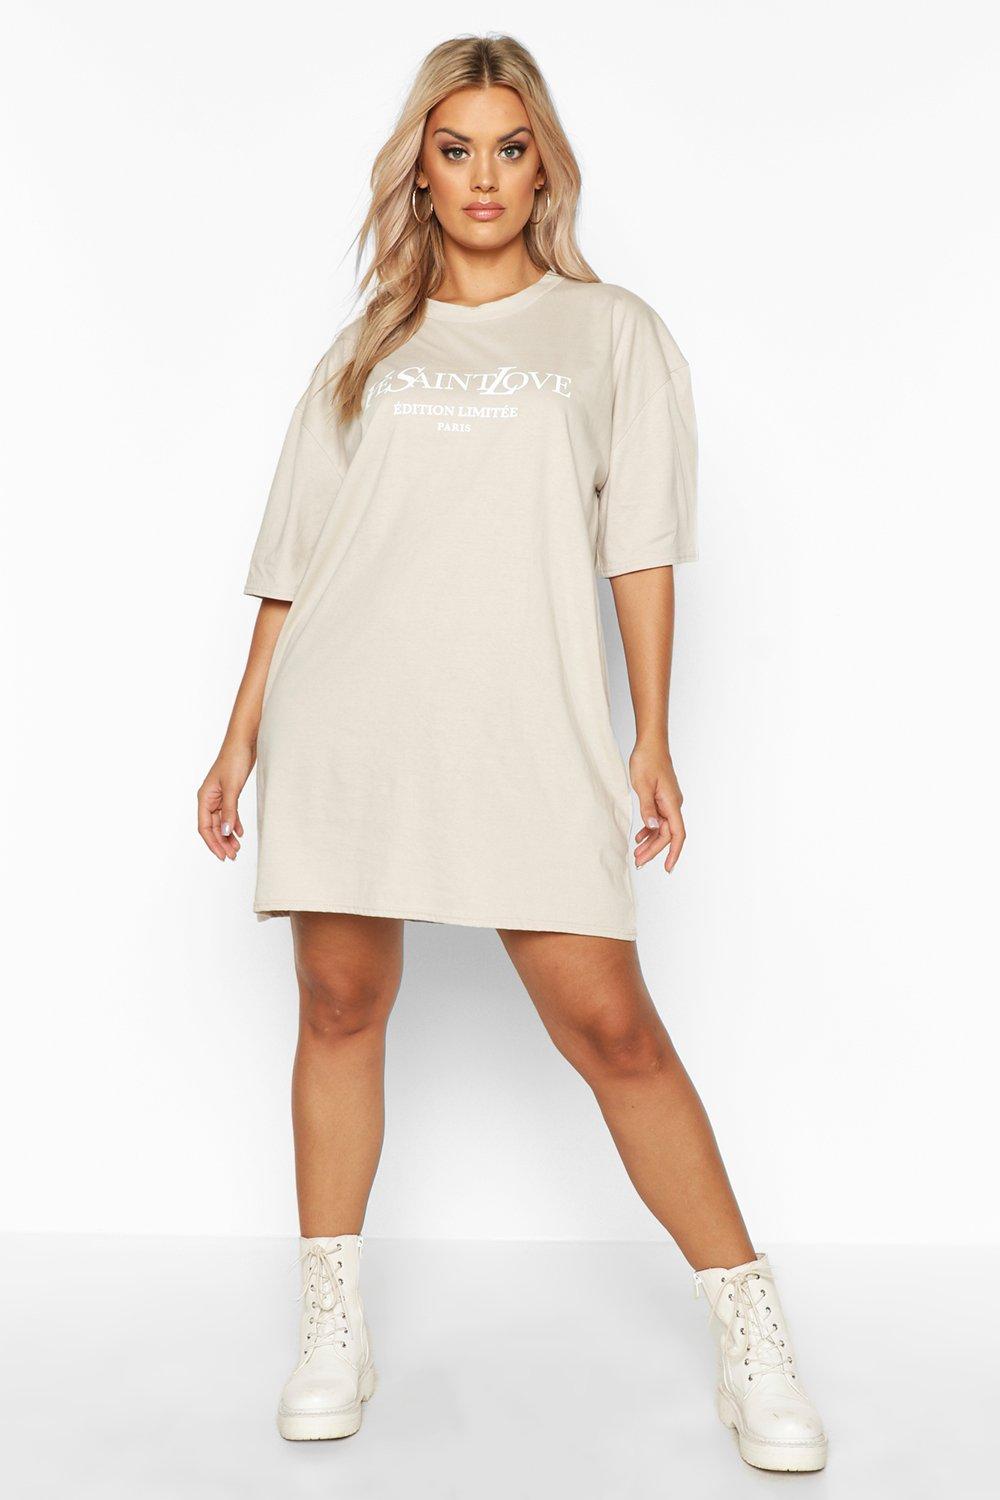 Featured image of post Black Oversized Slogan T Shirt Dress : Including sale design superheroes t shirts and t shirts cats at wholesale prices from slogan t shirts manufacturers.